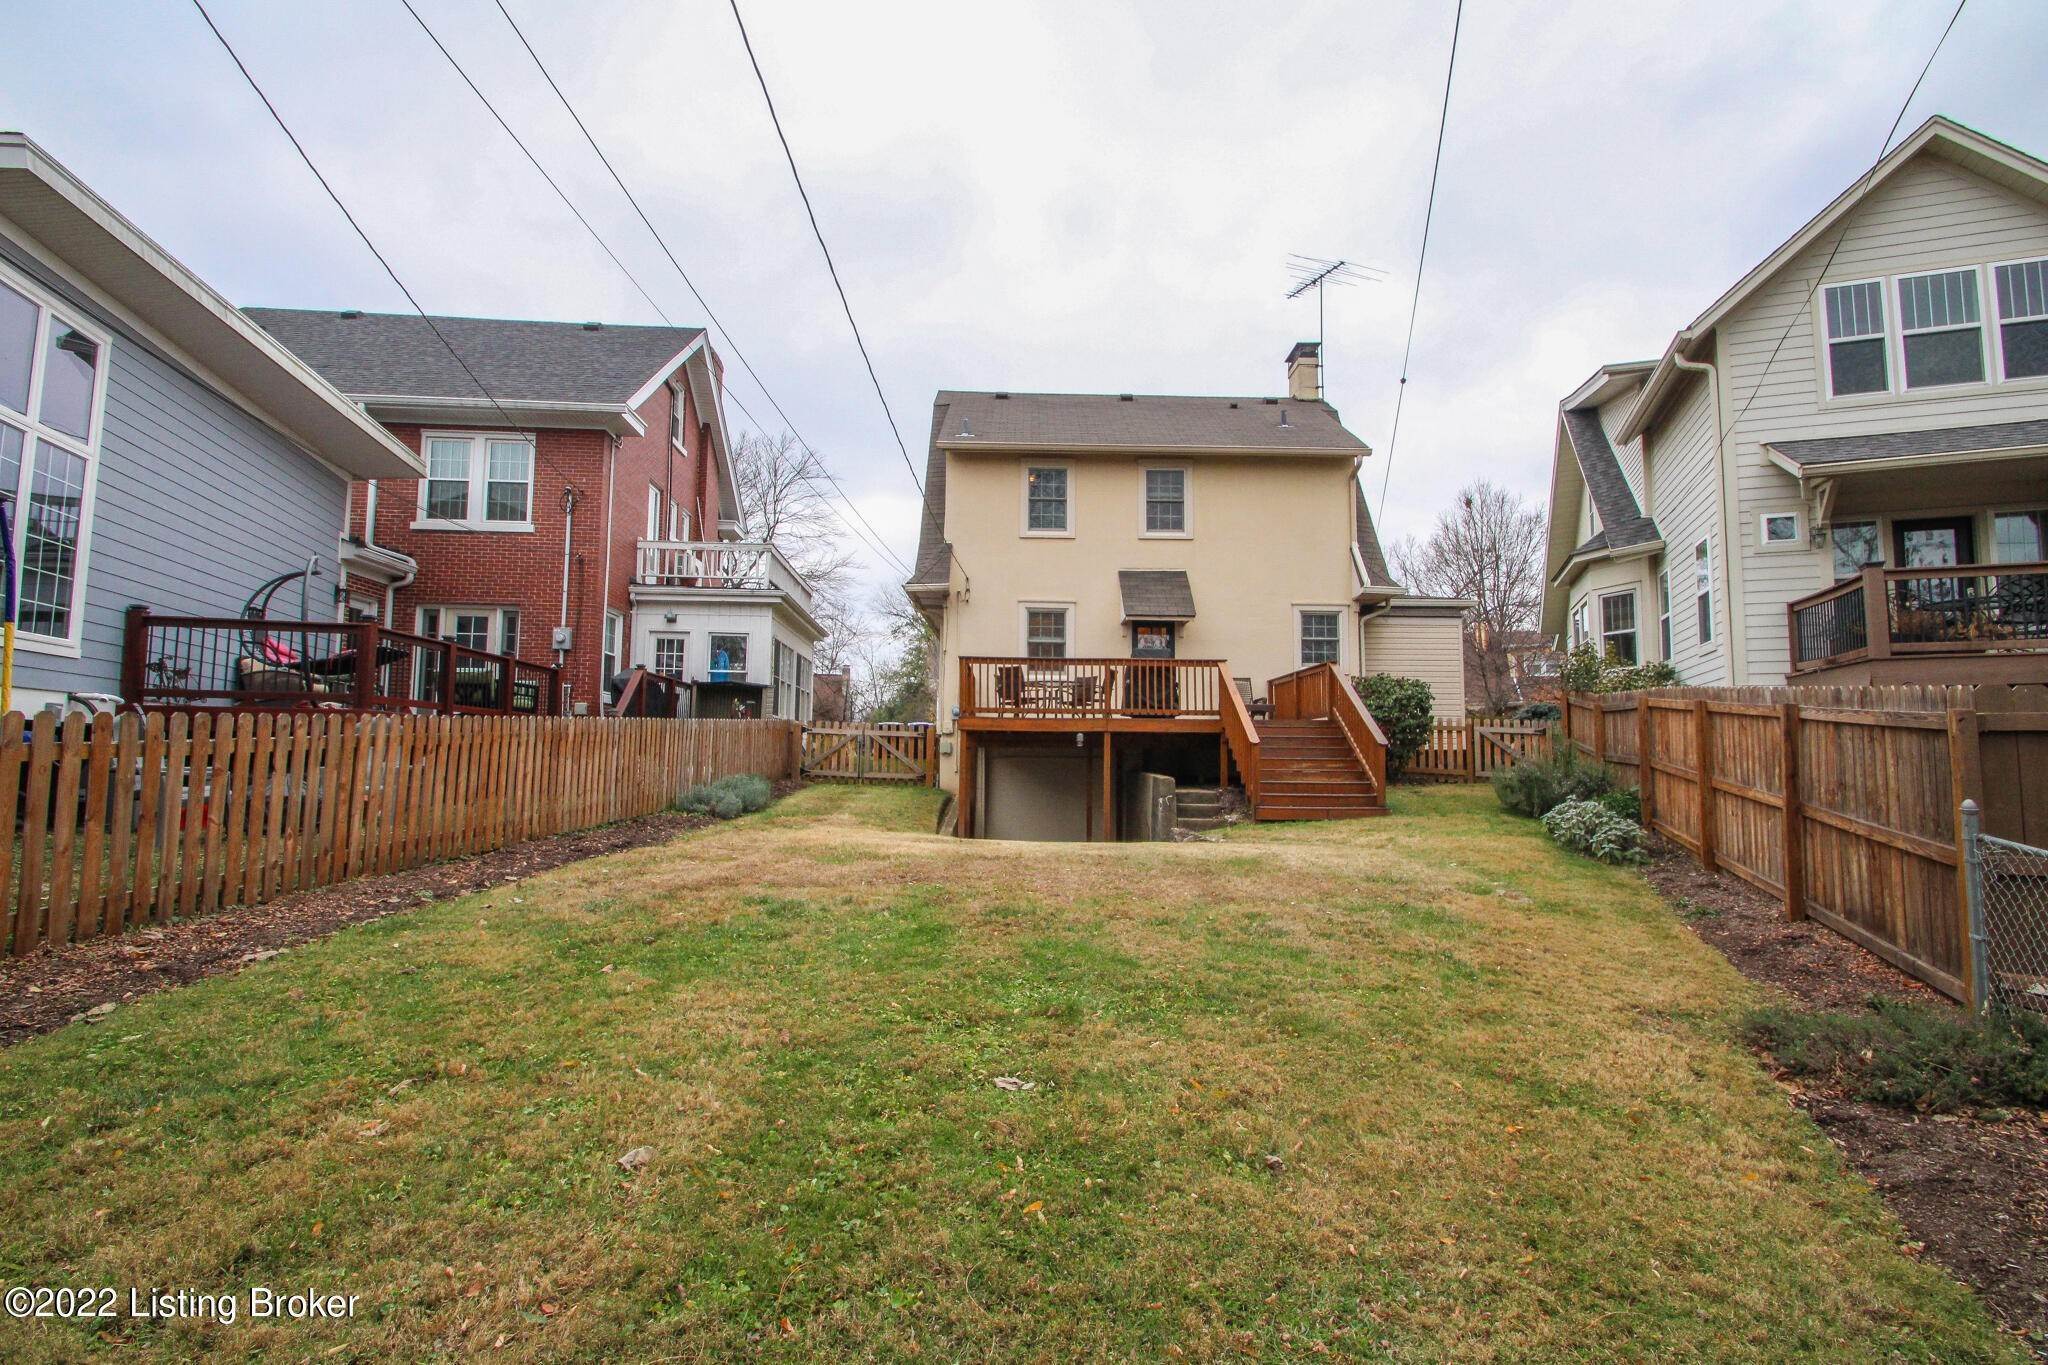 28. Single Family at Louisville, KY 40205